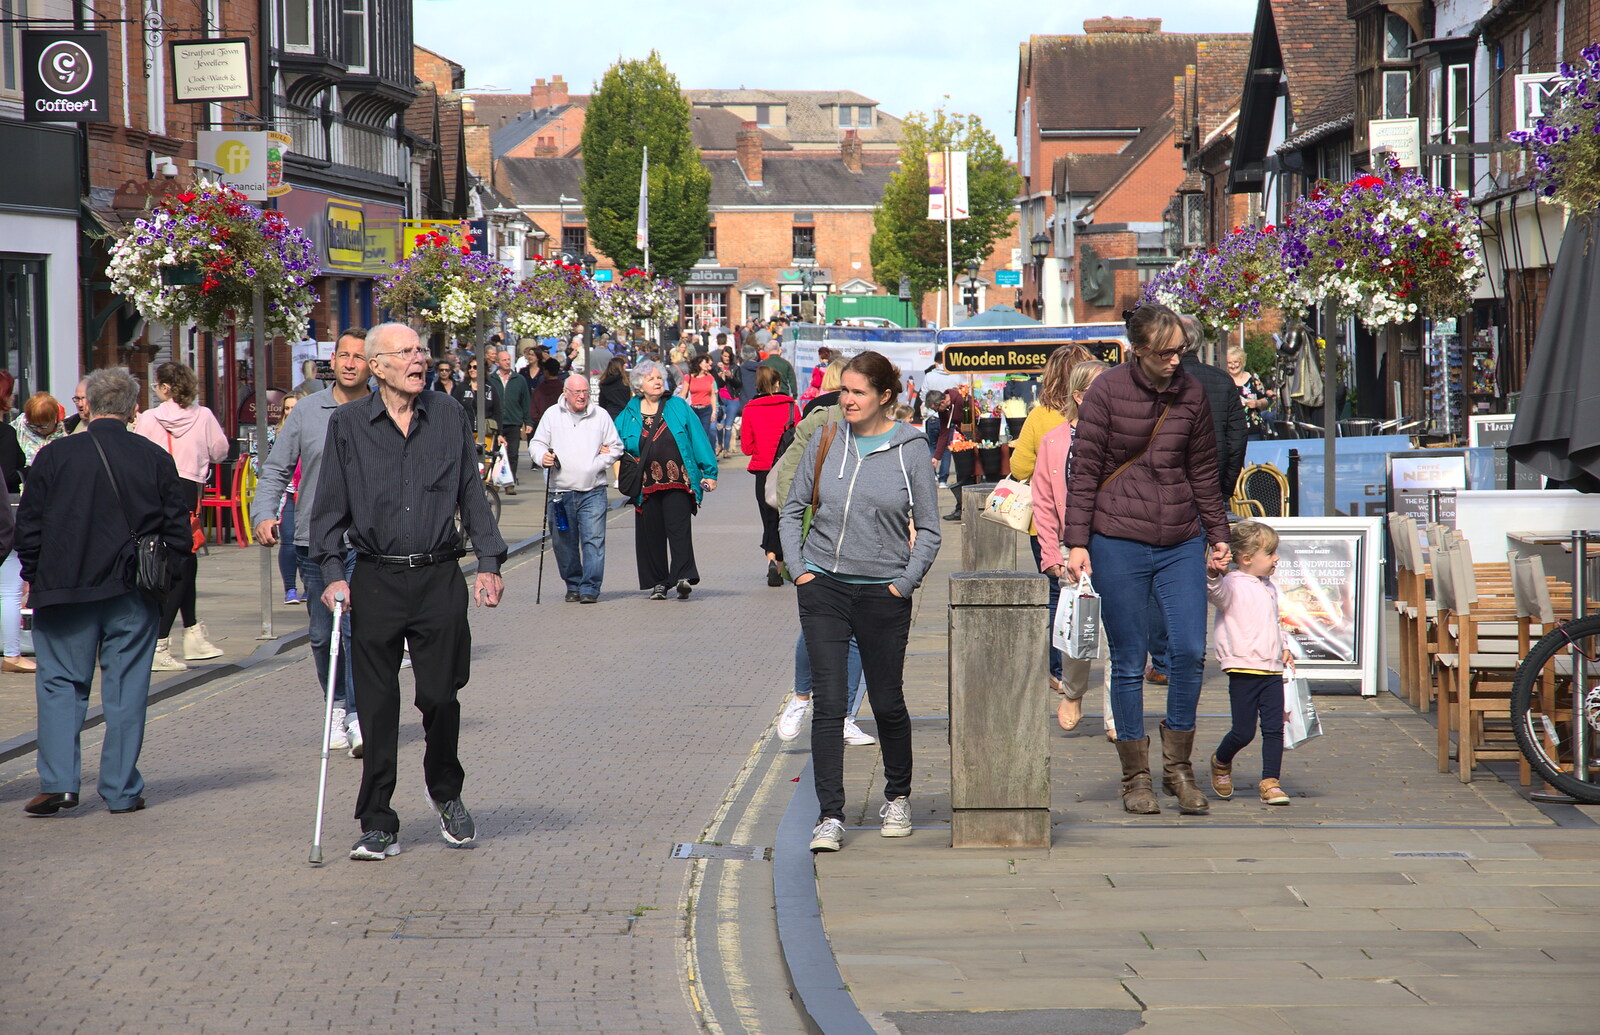 Grandad and Isobel on the streets of Stratford from A Postcard from Stratford-upon-Avon, Warwickshire - 9th September 2018